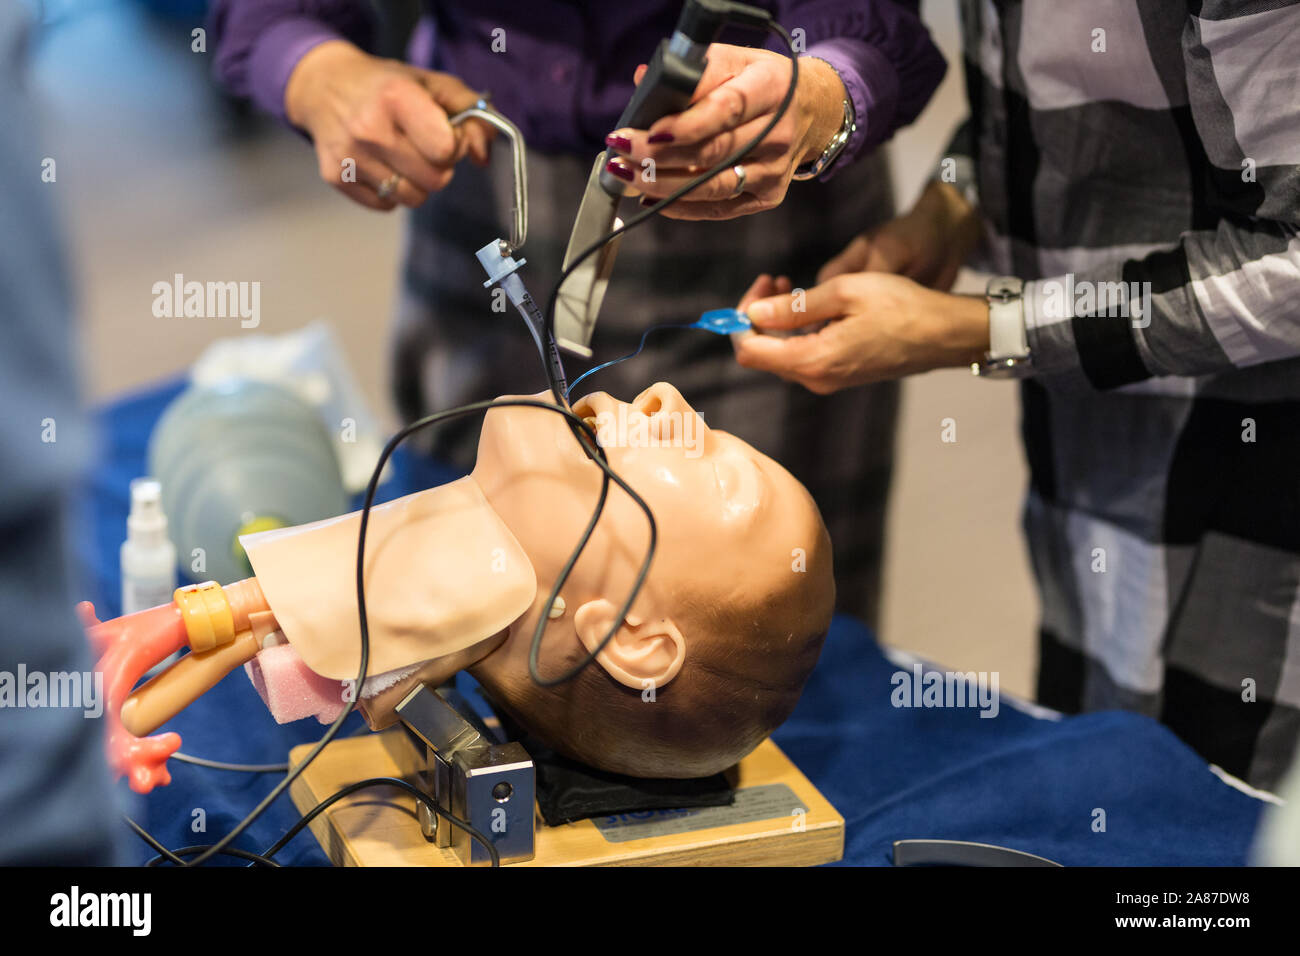 Medical doctor specialist expert displaying method of patient intubation technique on hands on medical education training and workshop Stock Photo